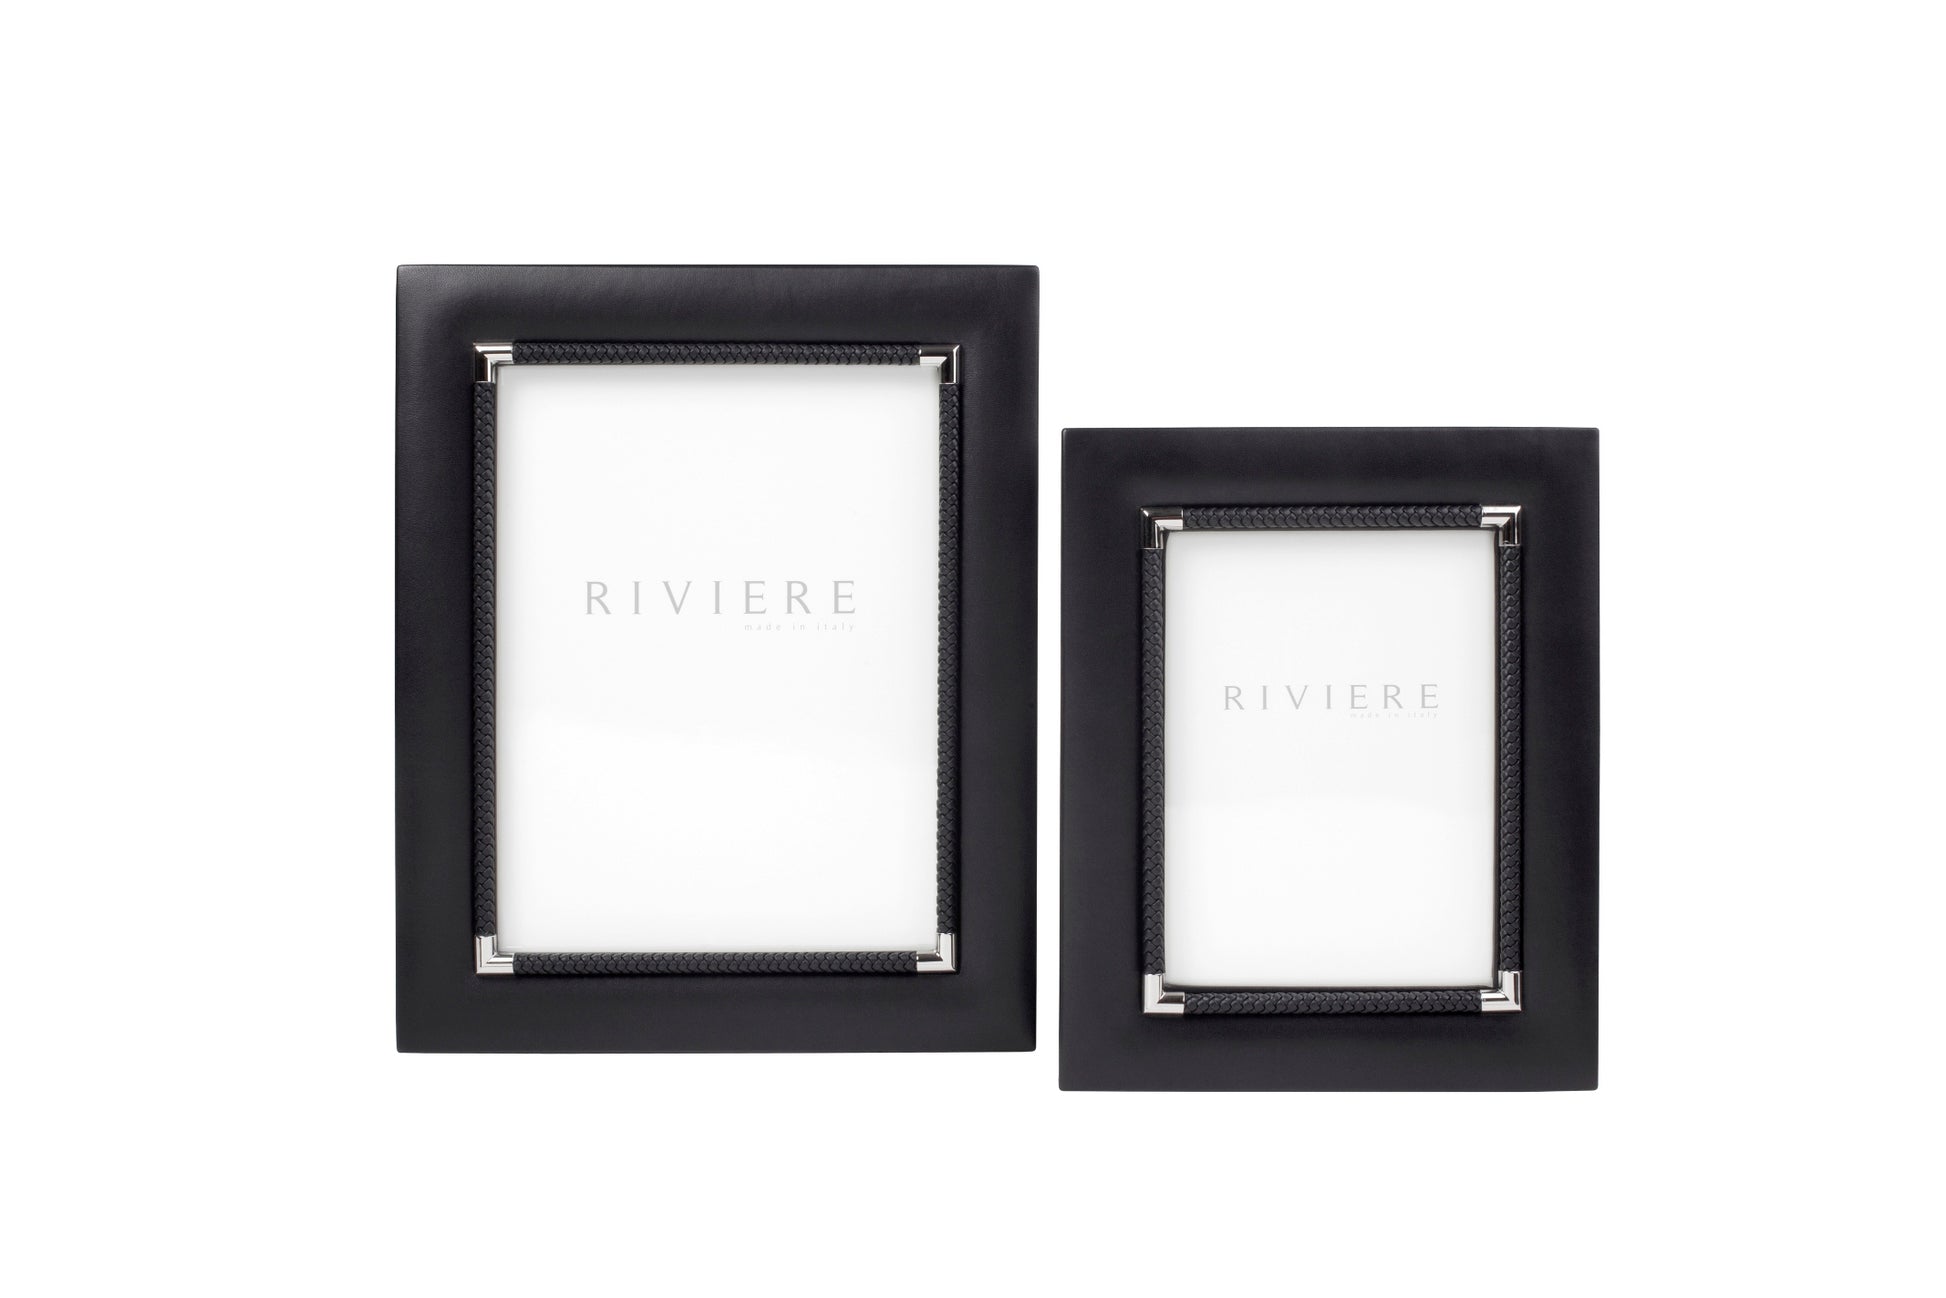 Riviere Thea #1 Leather Picture Frame With Metal Details | Luxurious Leather Frame Design | Inner Braided Trim for Added Detail | Chrome or Gold Metal Details for a Touch of Elegance | Explore a Range of Luxury Home Accessories at 2Jour Concierge, #1 luxury high-end gift & lifestyle shop